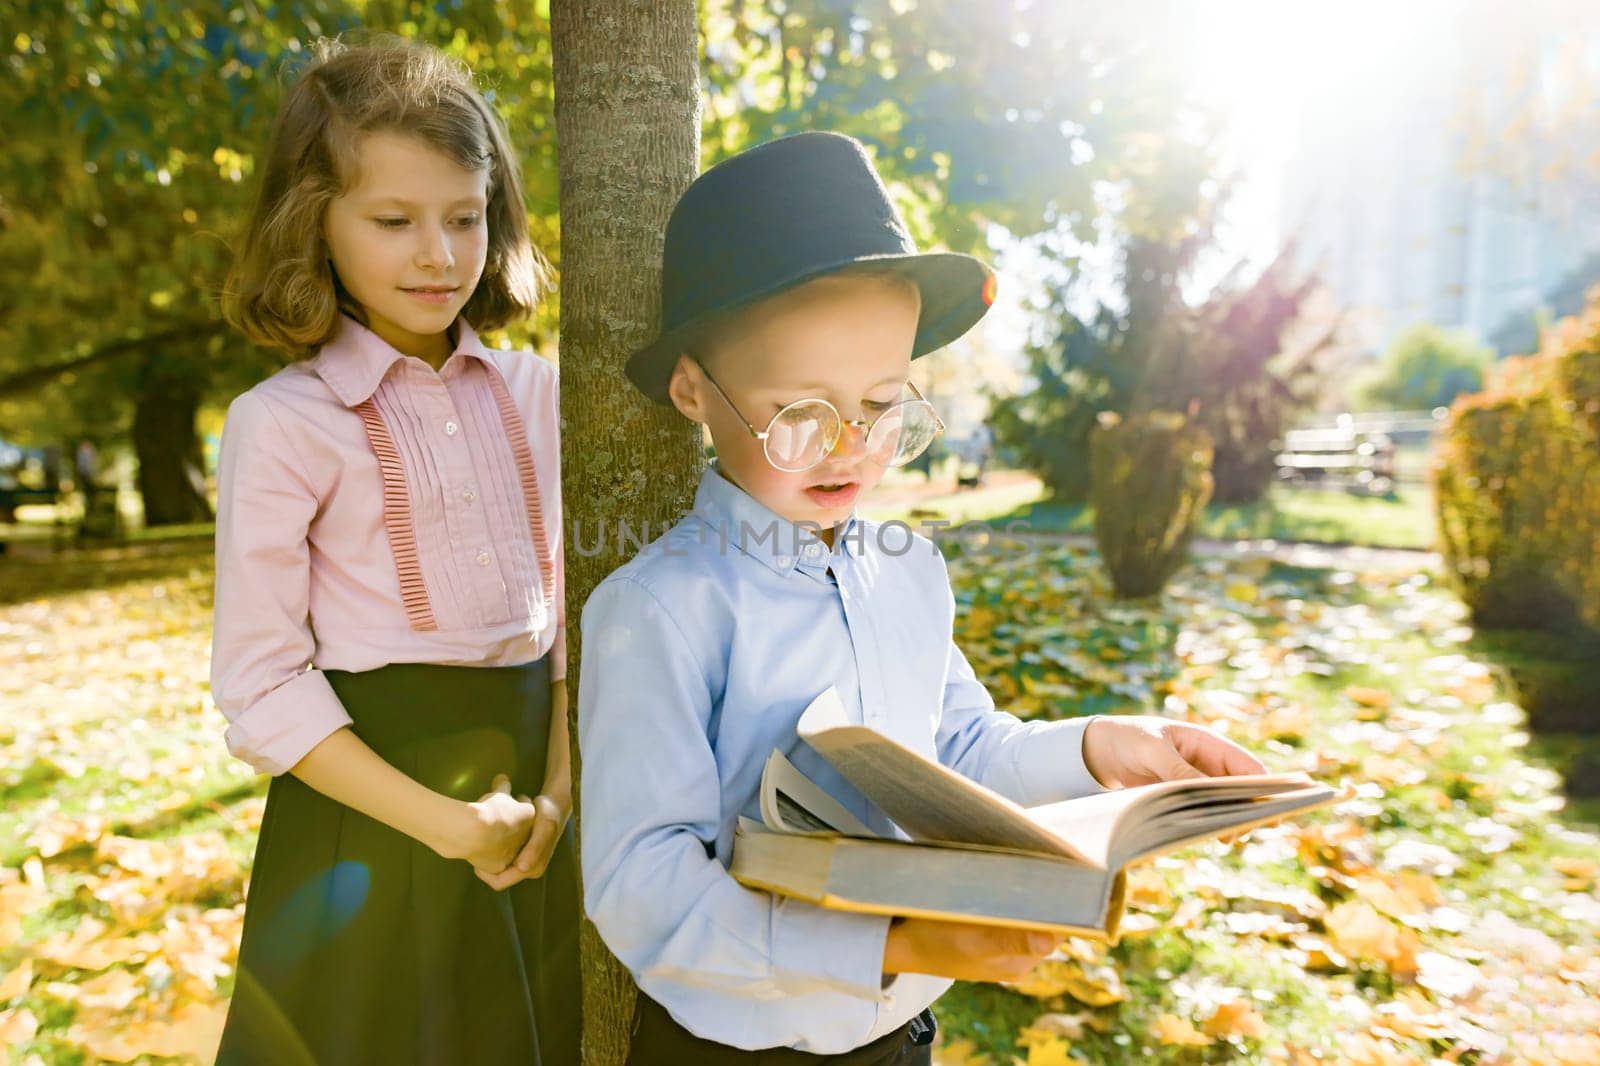 Little boy 6,7 years old with hat, glasses, reading book and girl 7,8 years old by VH-studio